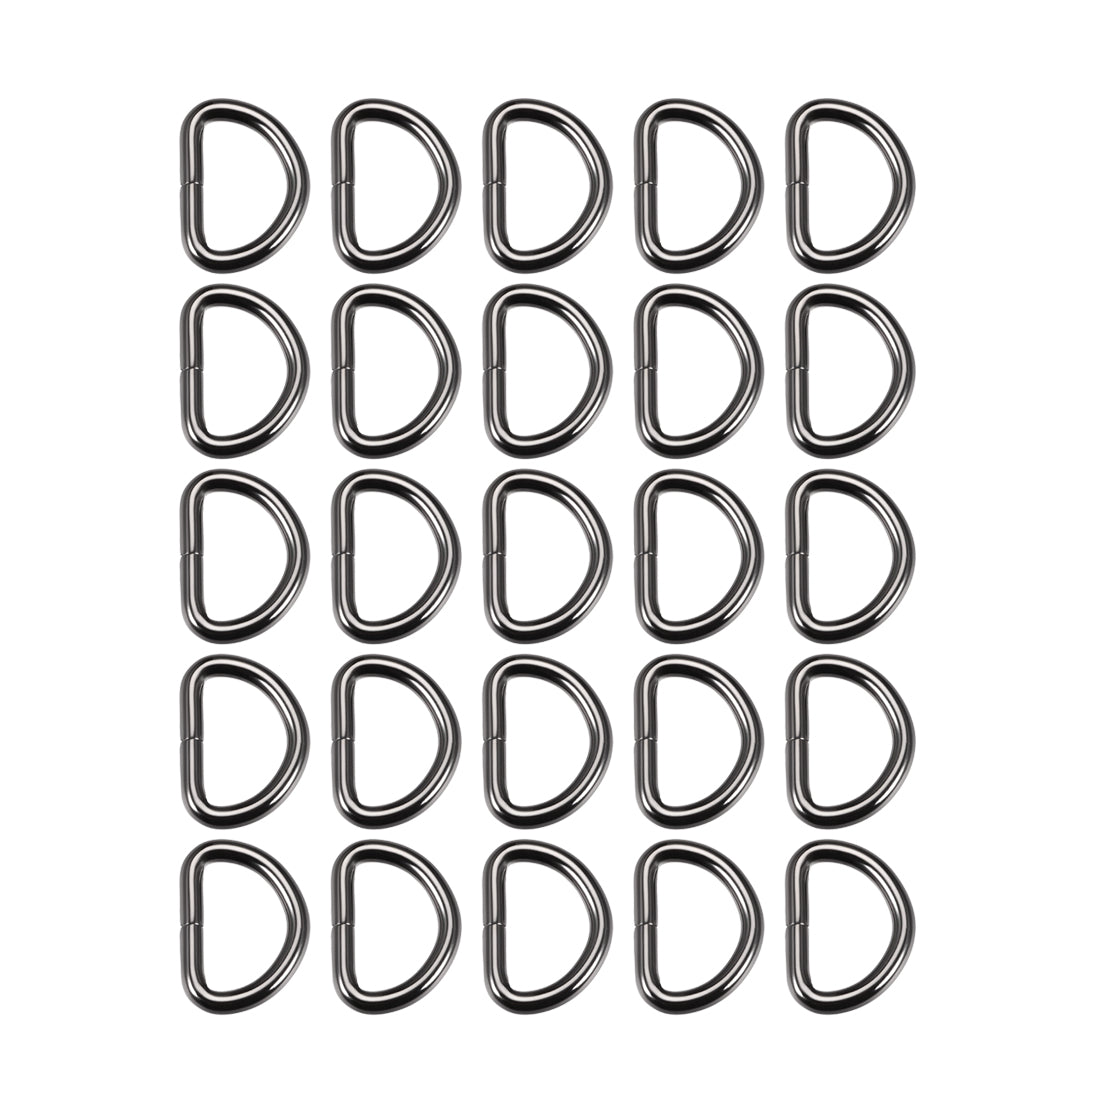 uxcell Uxcell 25 Pcs D Ring Buckle 1 Inch Metal Semi-Circular D-Rings Black for Hardware Bags Belts Craft DIY Accessories